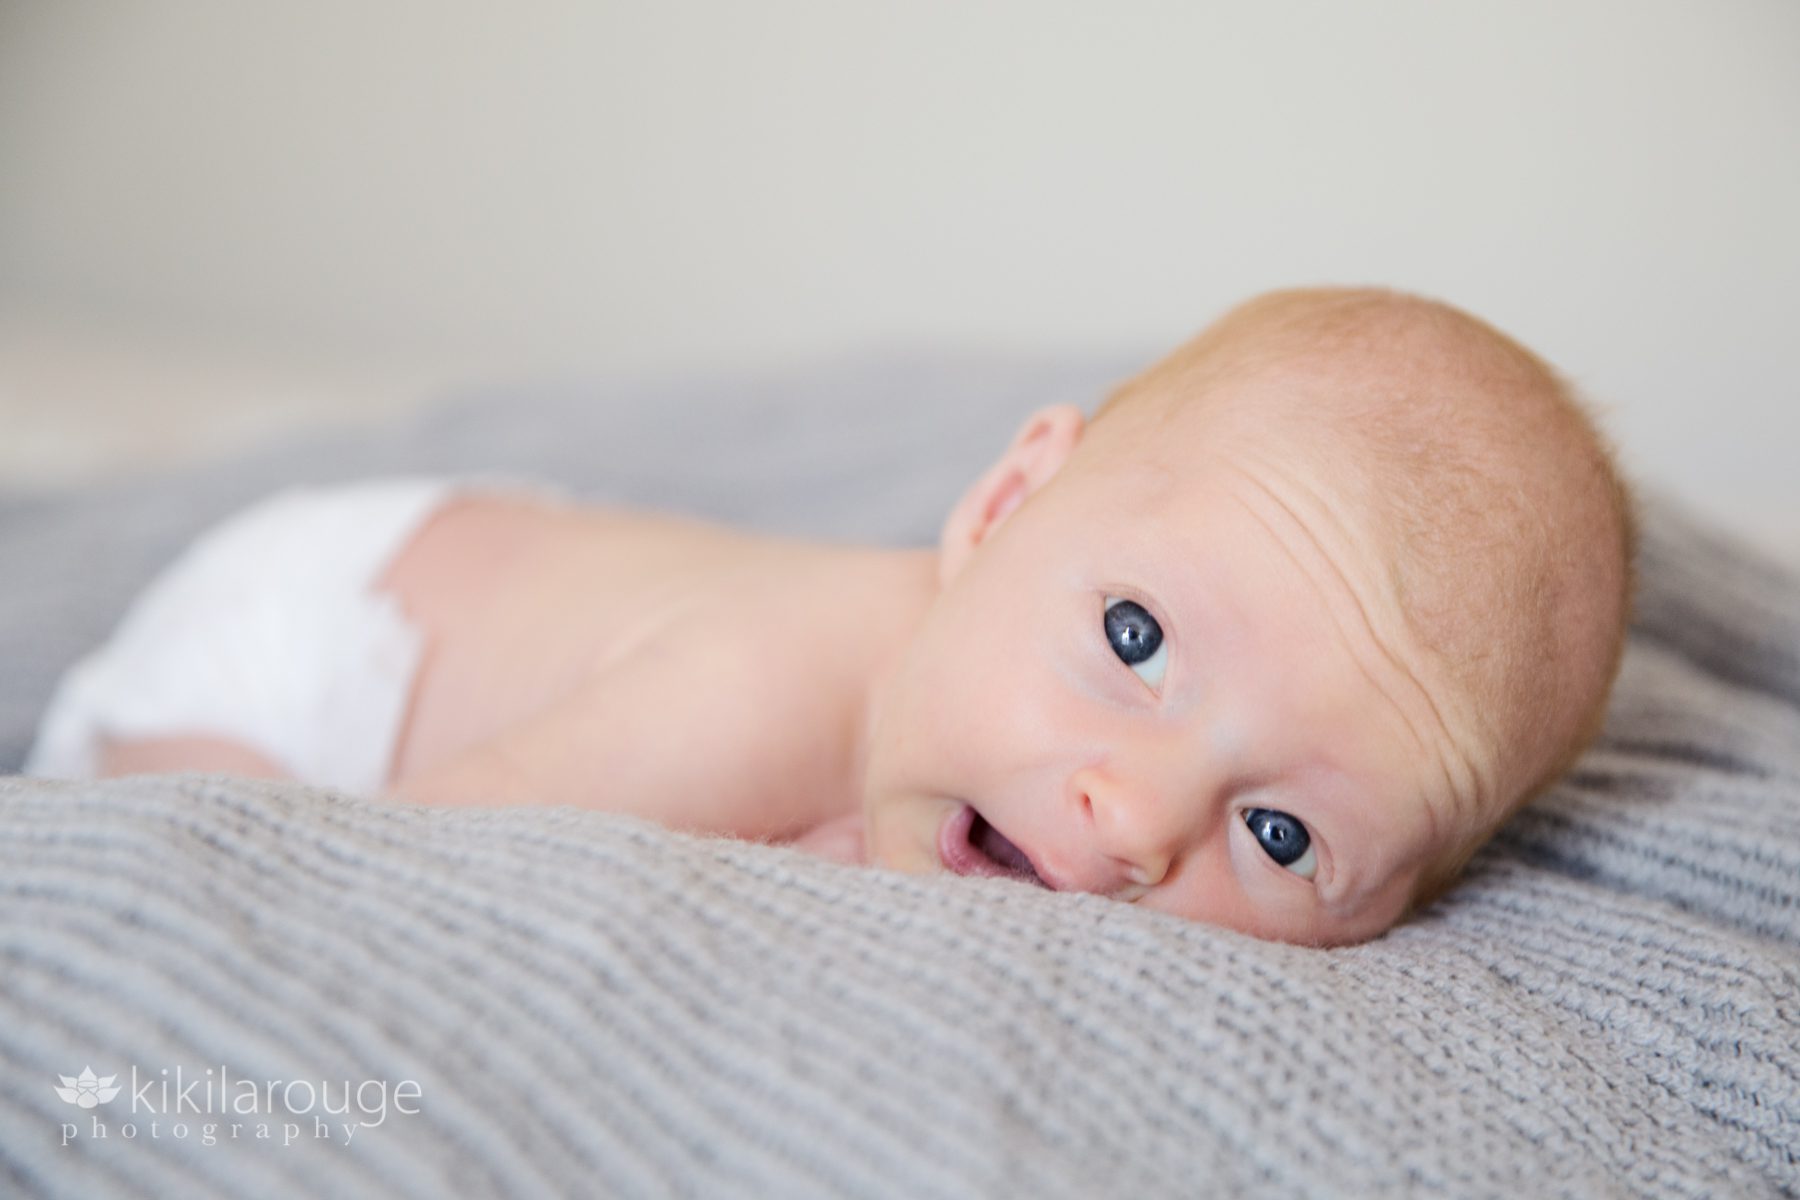 Newborn baby in white diaper with big blue eyes open